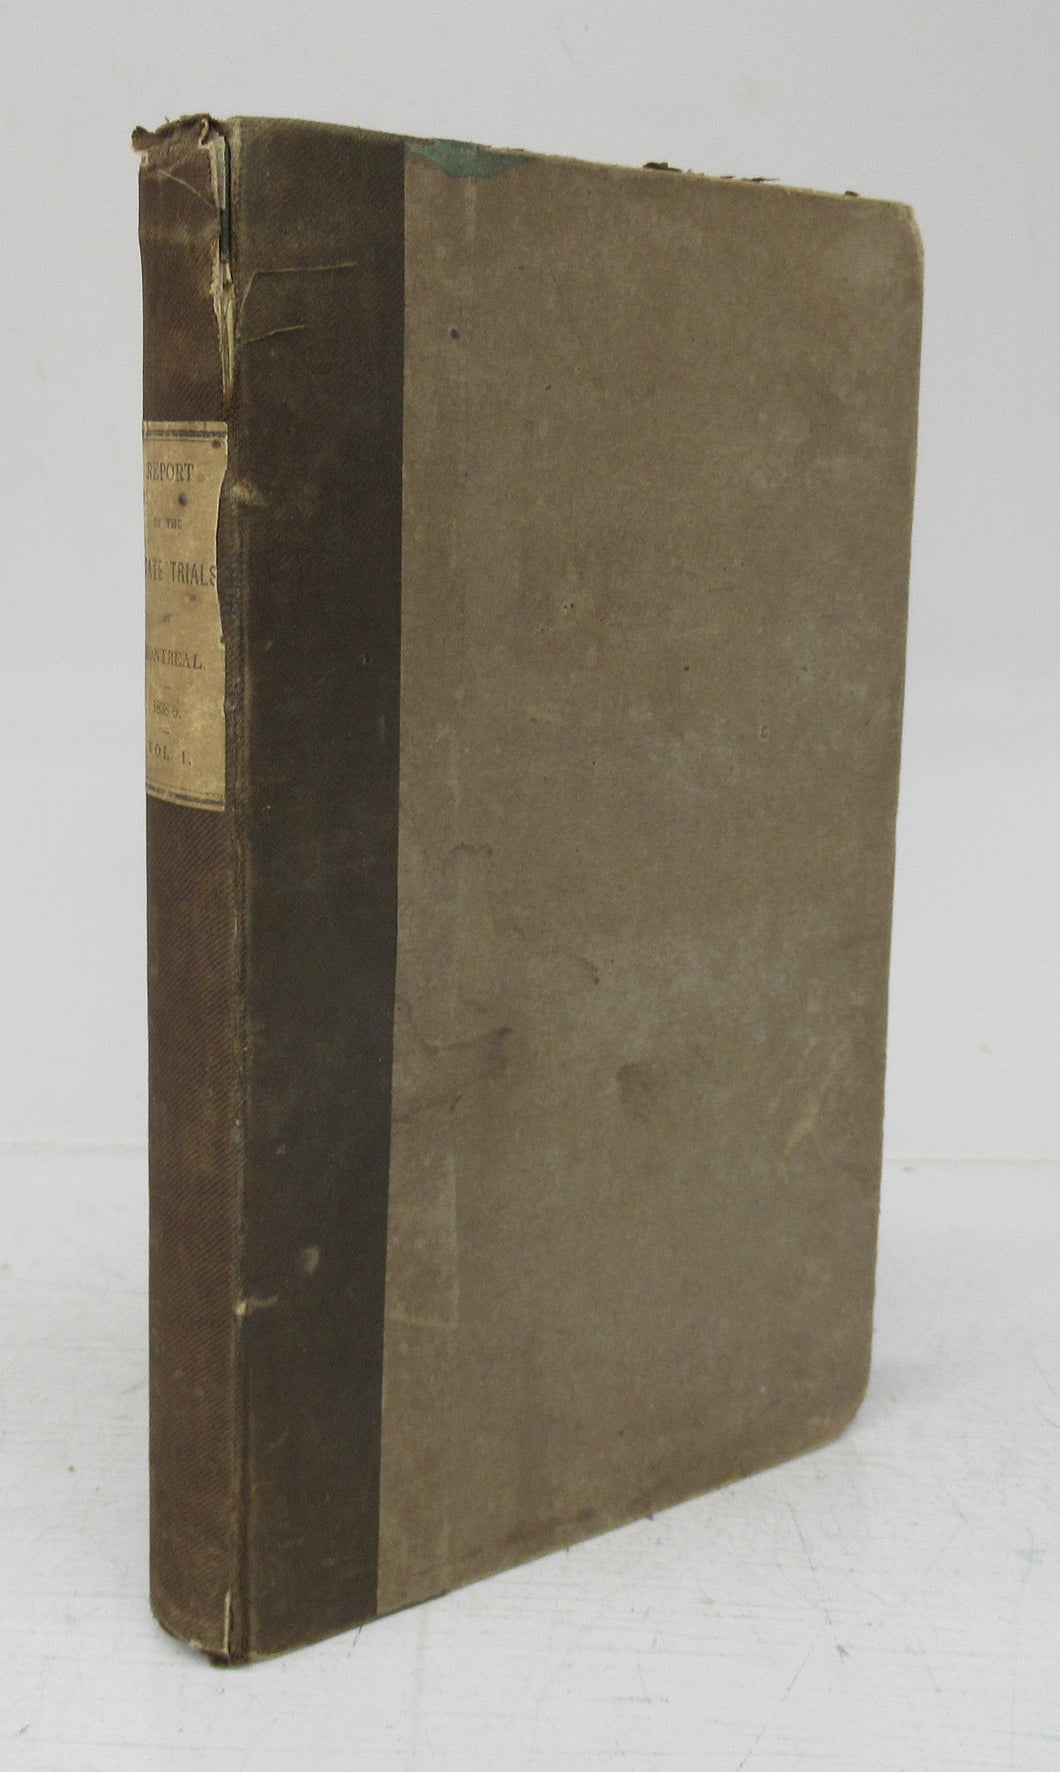 Report of the State Trials, Before  A General Court Martial held at Montreal in 1838-9: Exhibiting a Complete History of The Late Rebellion in Lower Canada. Volume I only